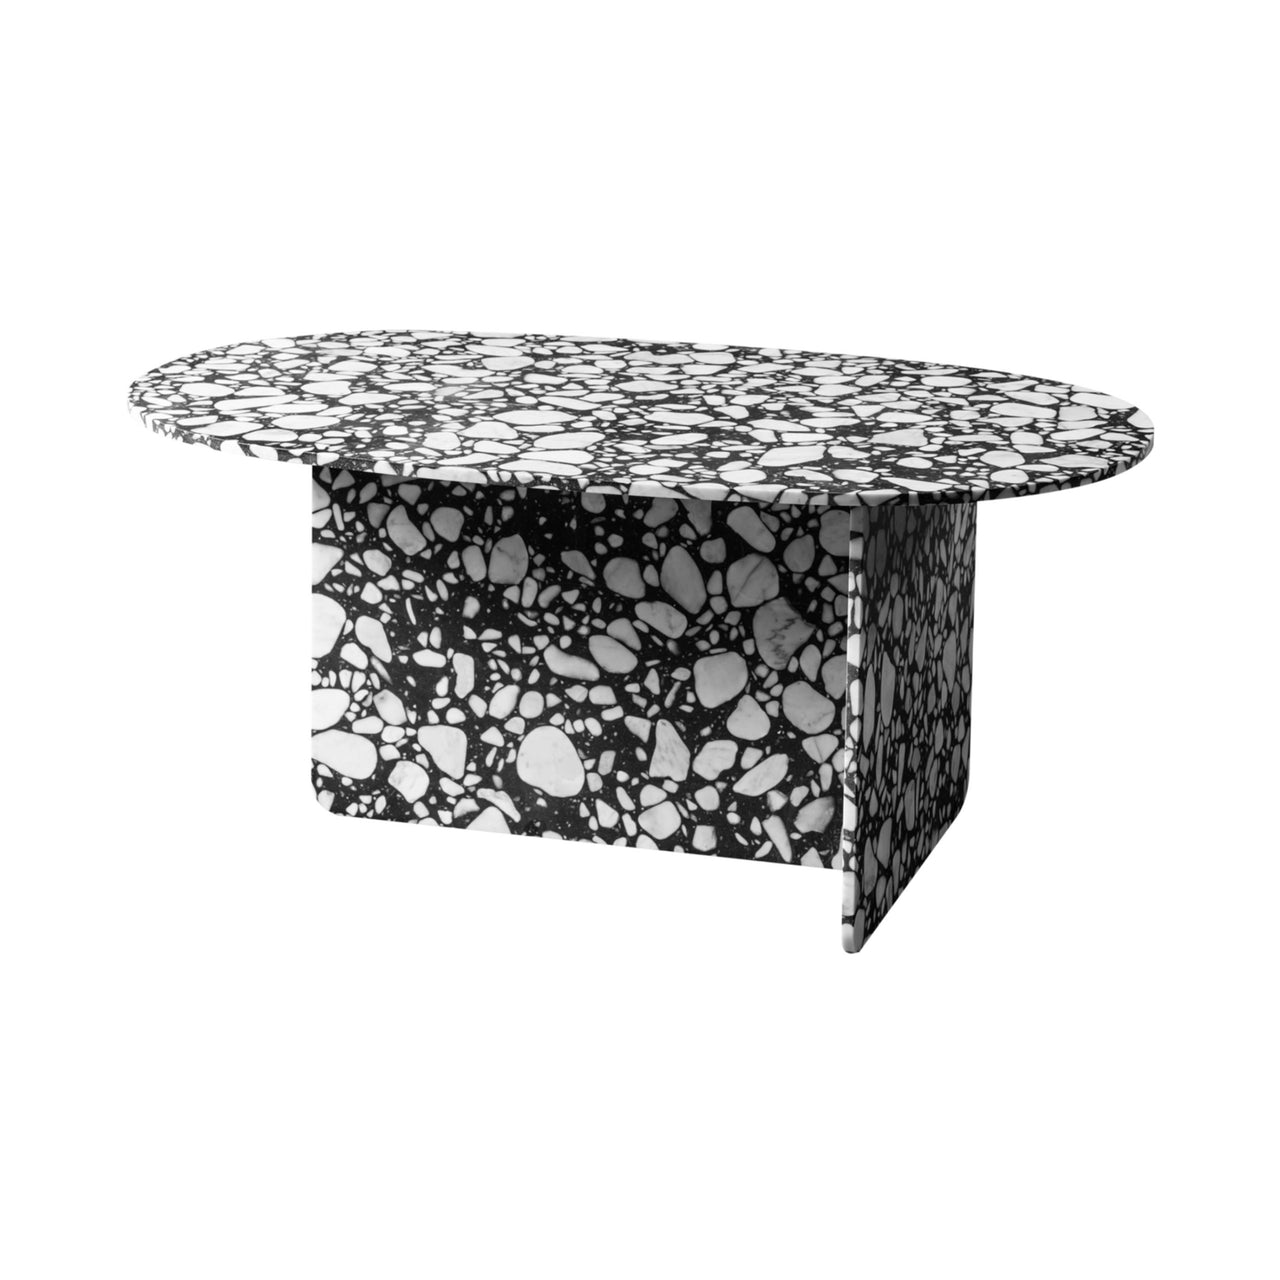 Chap Coffee Table: Large - 35.4